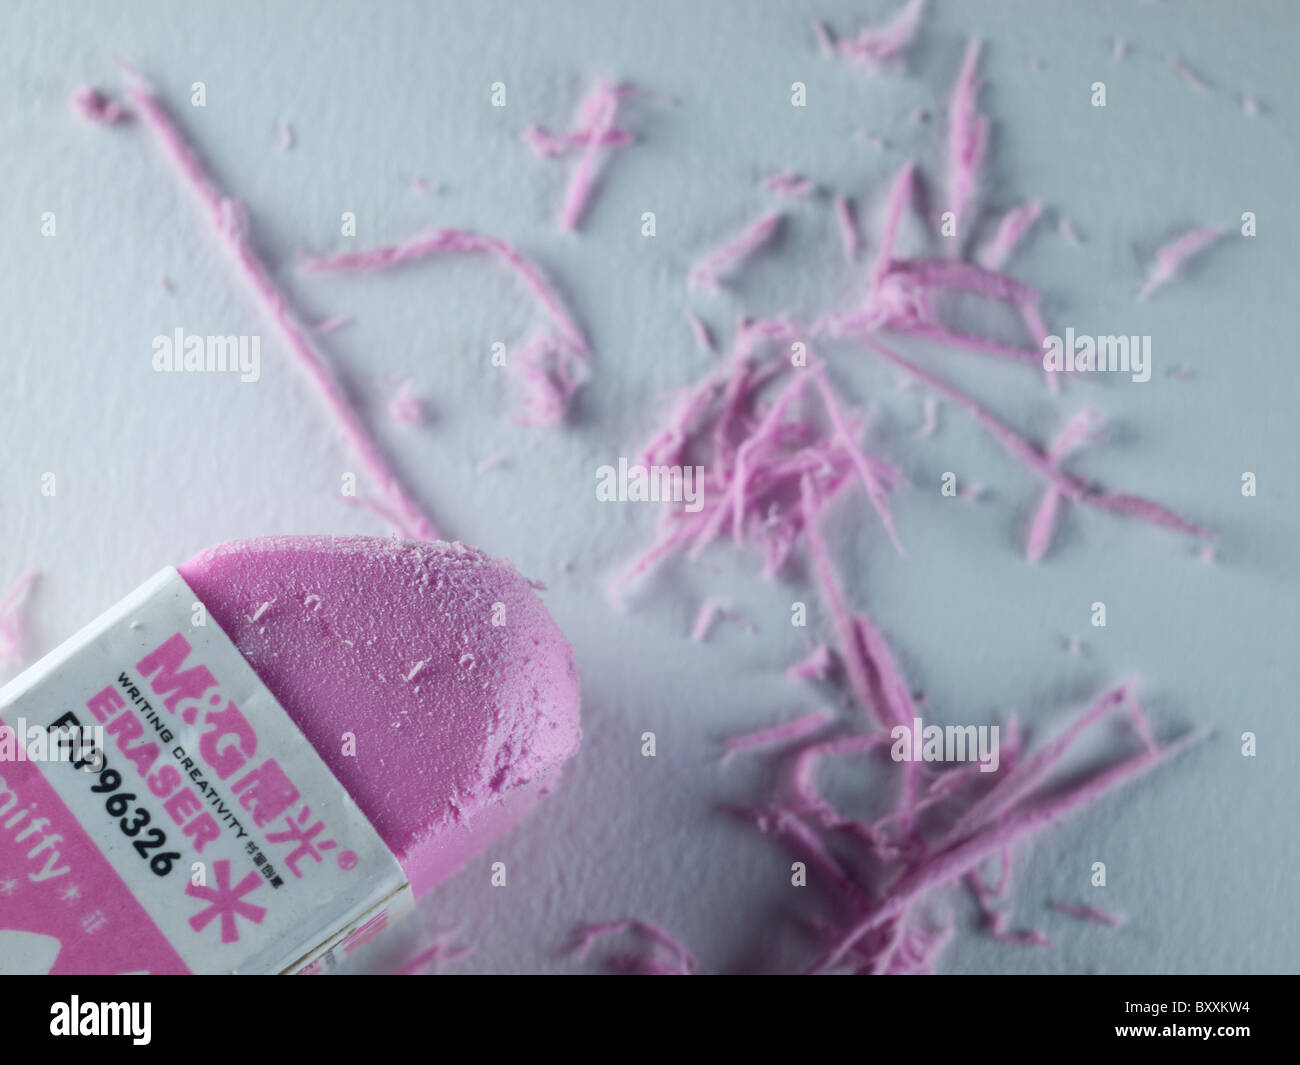 A macro shot of a pink eraser rubber set against white background Stock Photo